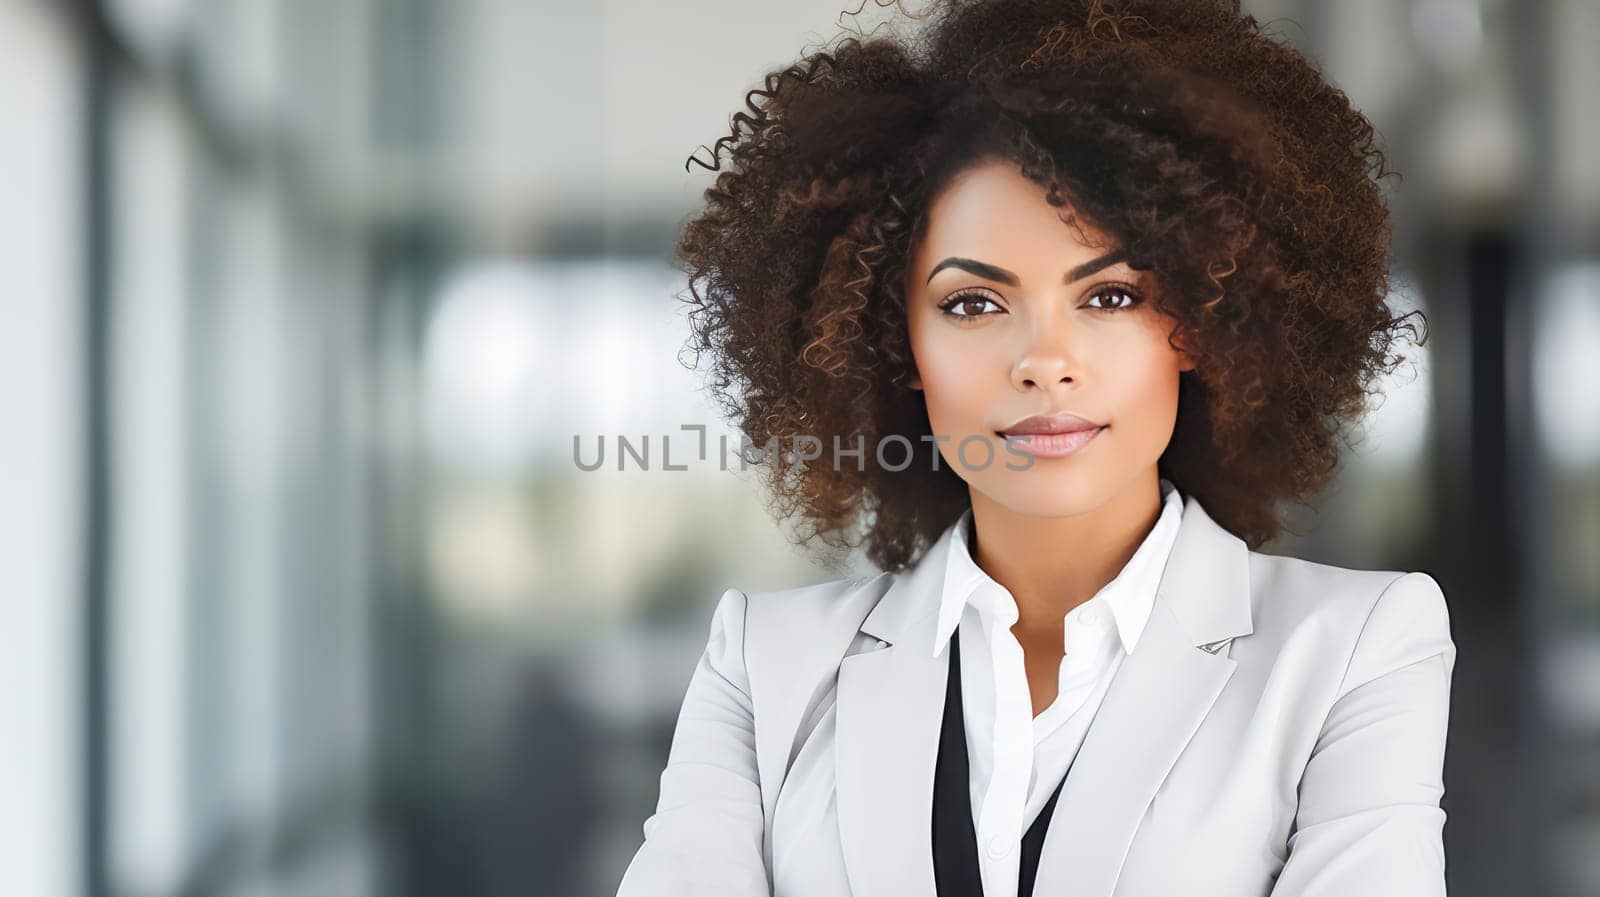 Portrait of a stylish, elegant, authoritative young woman, business woman in a white office. African American woman with dark skin and curly hair is wearing a shirt and jacket, suit, dress code by Alla_Yurtayeva